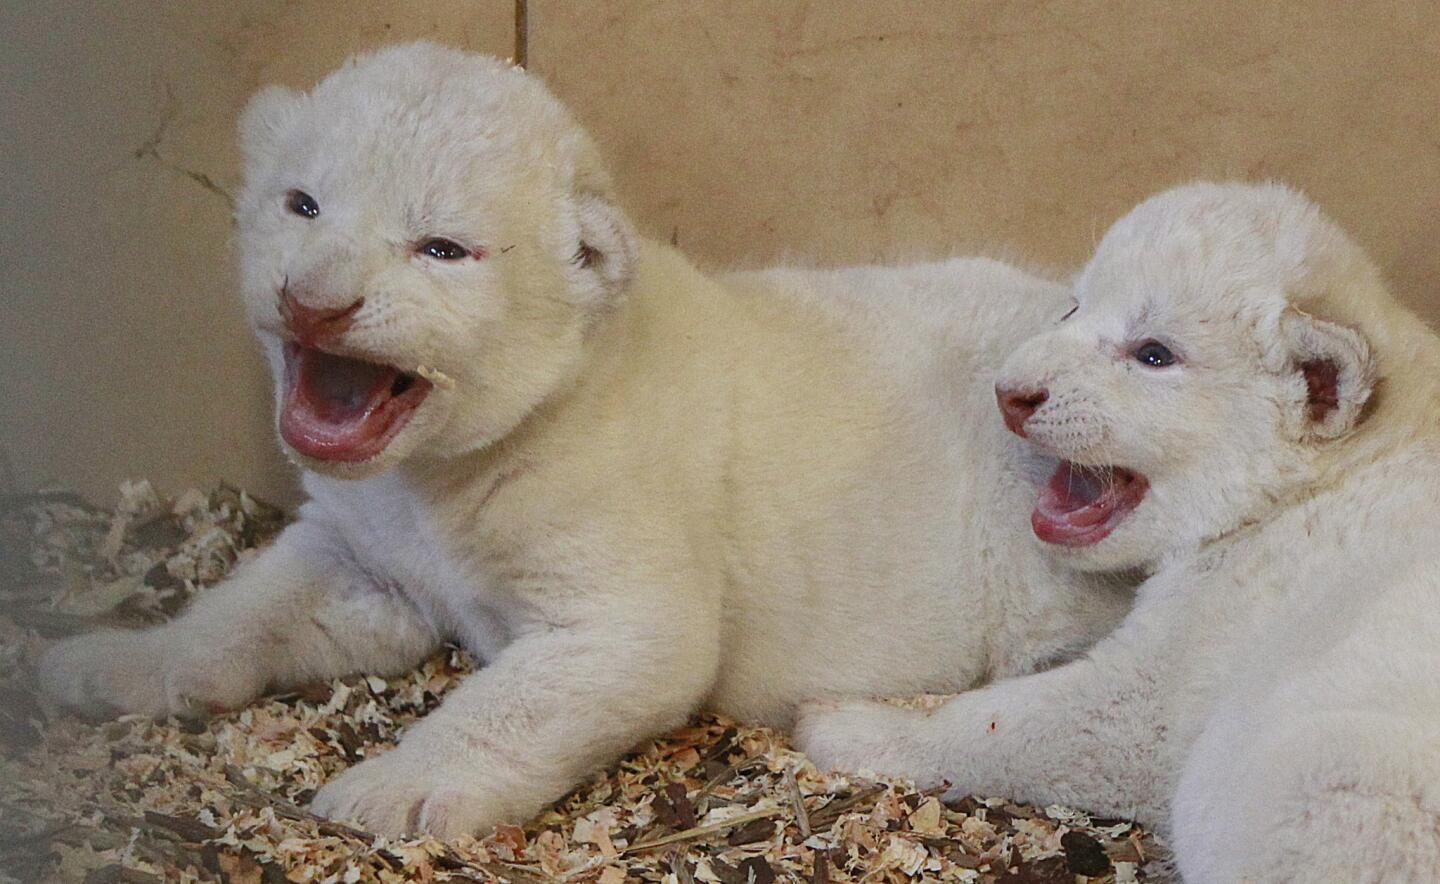 Two rare, 4-day-old white lion cubs are pictured at the private Zoo Safari in Borysew, Poland, on Sept. 22, 2016. All together, four cubs were born Sept. 18, 2016, to 5-year-old Azira.